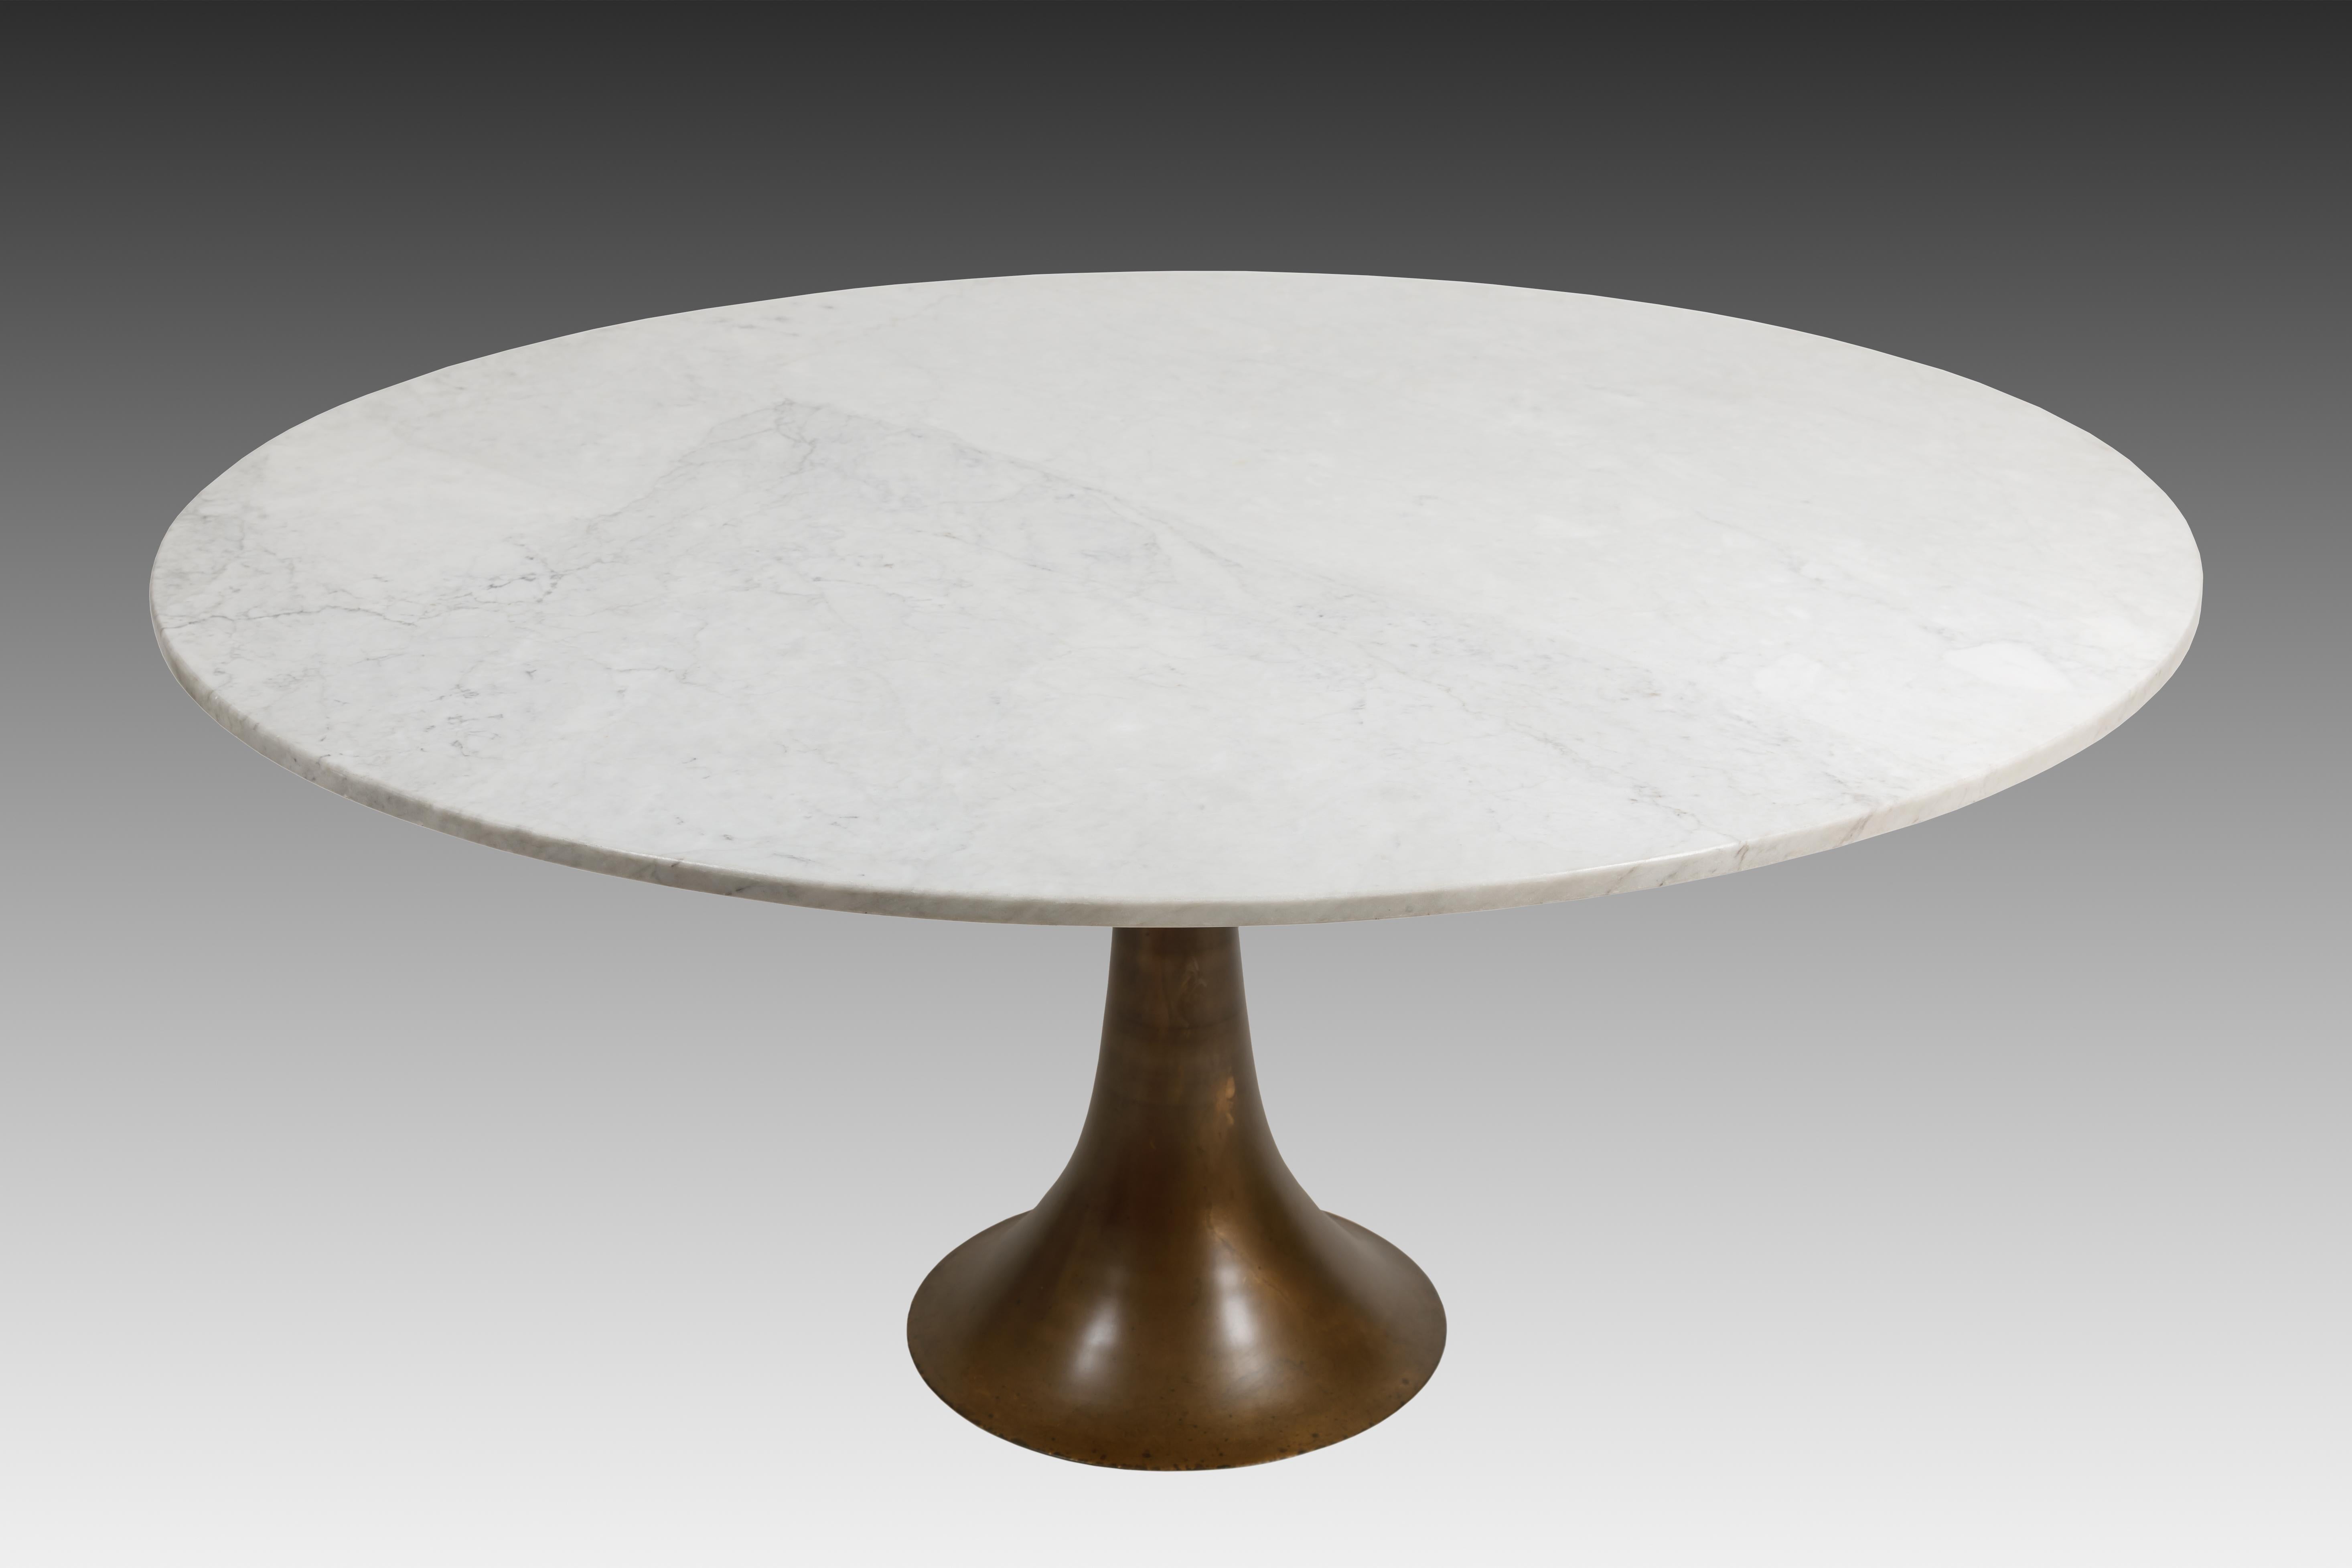 Designed by Angelo Mangiarotti and manufactured by Bernini early and rare dining or center table with original white Carrara marble top on bronze base by Fonderia Battaglia, Italy, 1959. The Carrara marble is beautifully veined and patinated with no